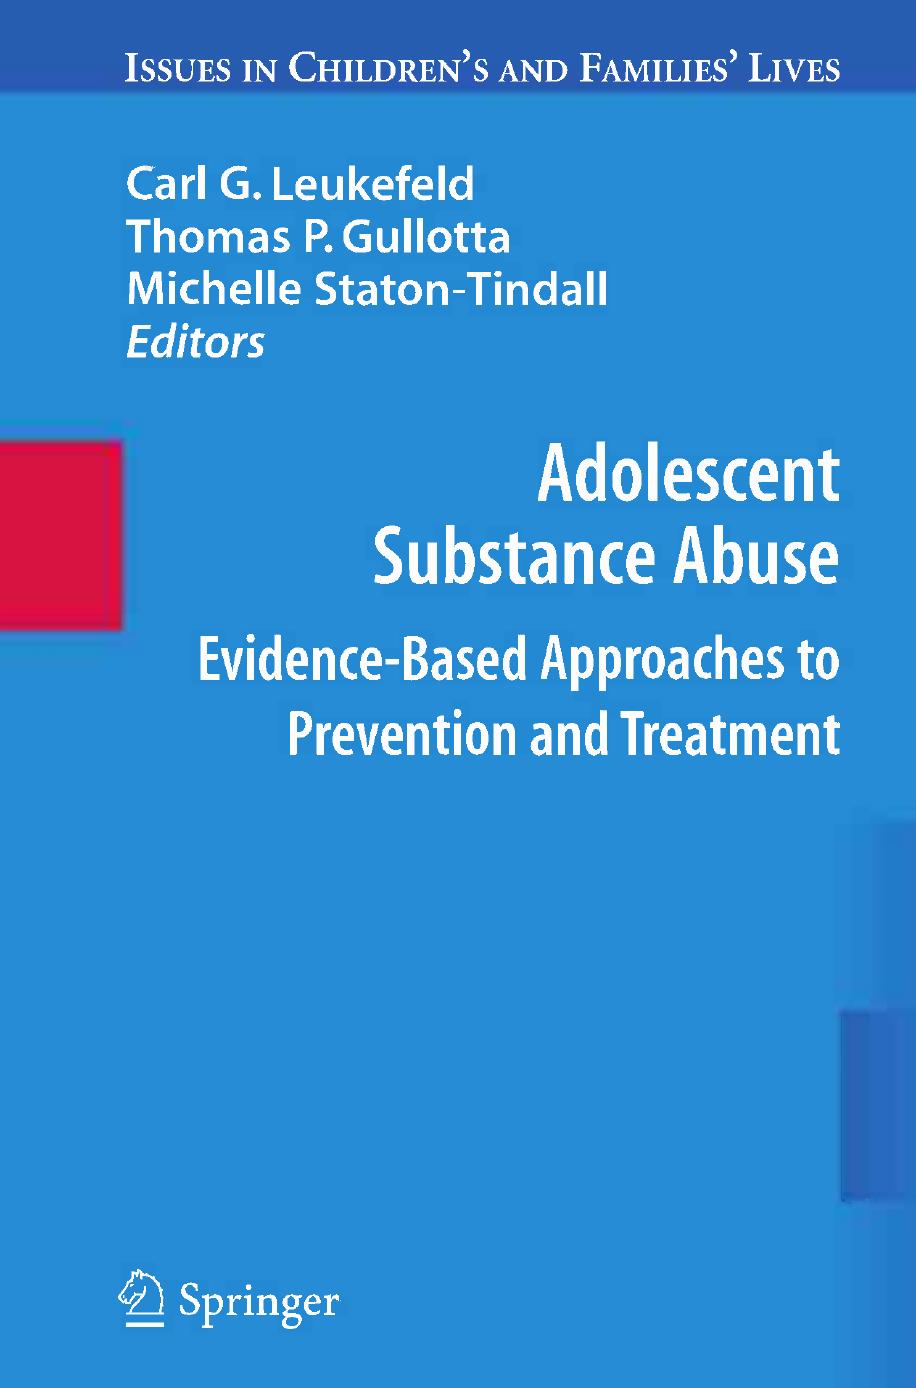 1 Adolescent Substance Abuse  Evidence-Based Approaches to Prevention and Treatment 2009